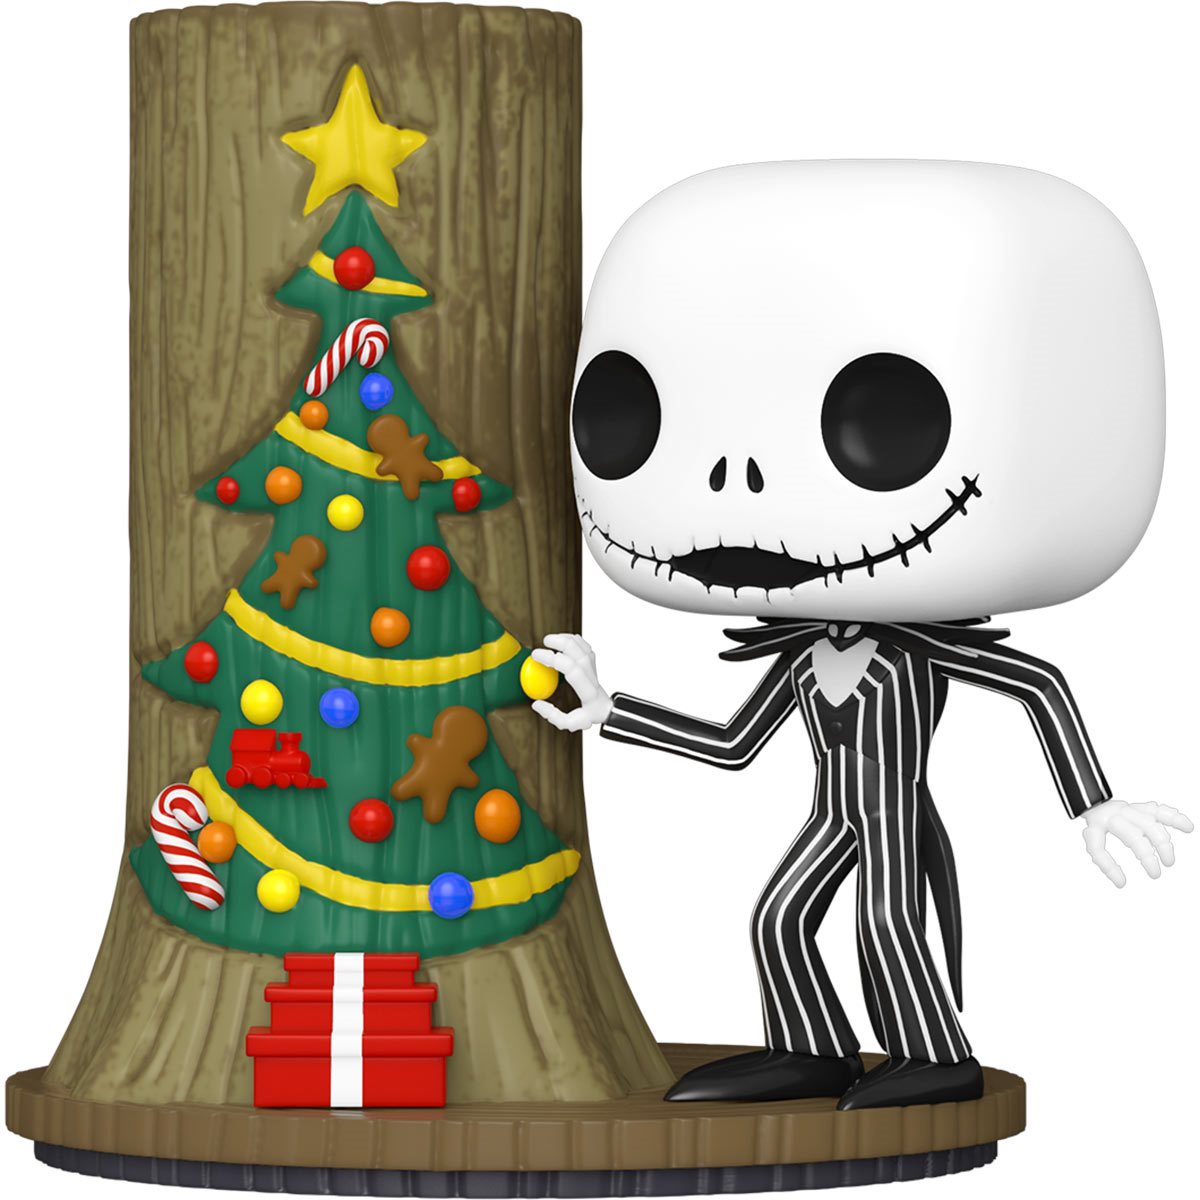 Get in the Halloween spirit with this LEGO The Nightmare Before Christmas  build